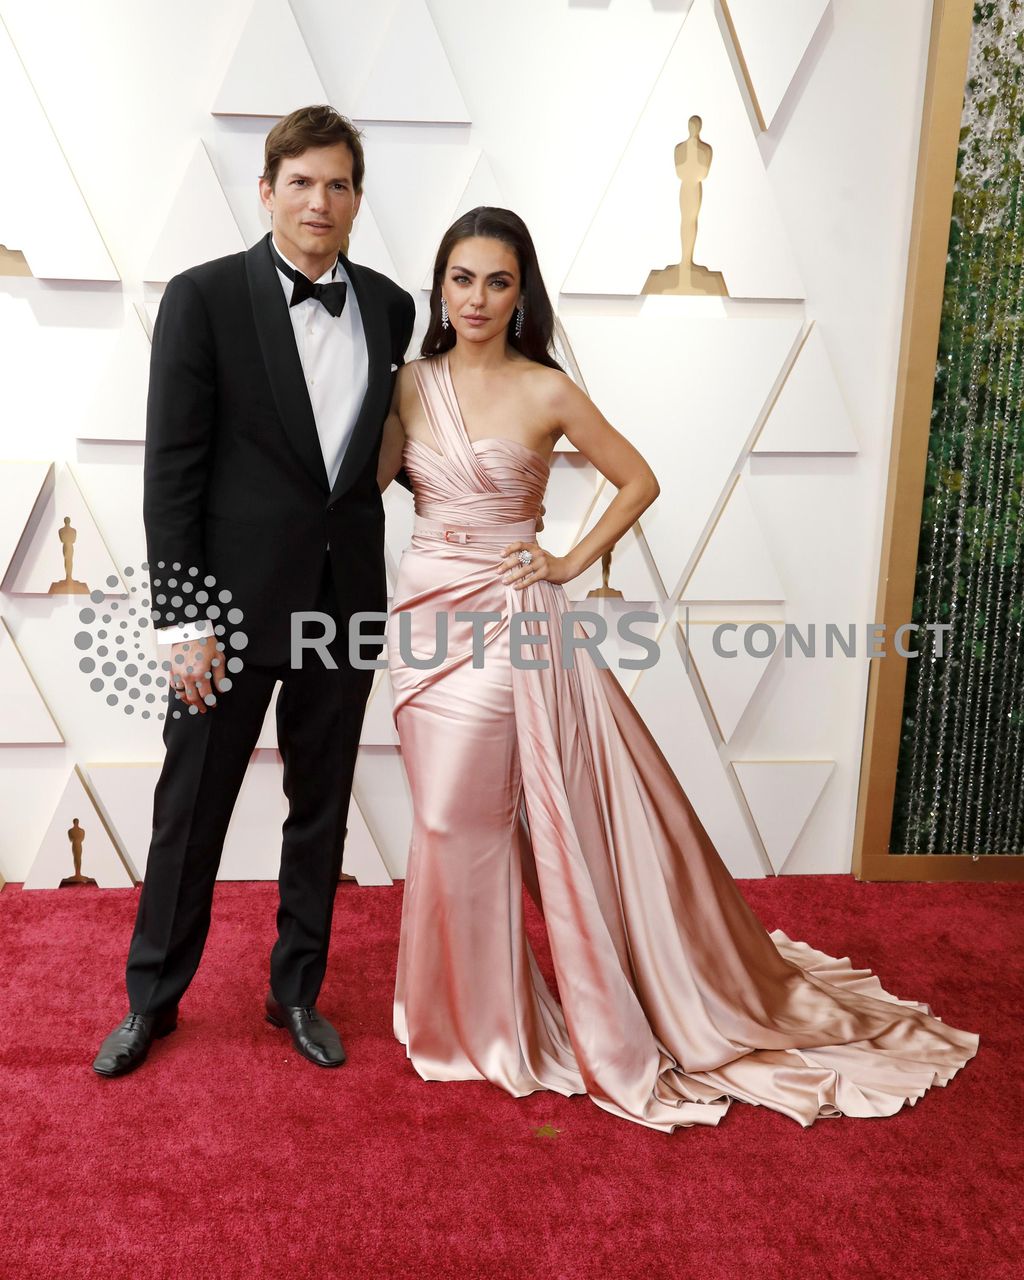 94th Academy Awards (Oscars) - Red Carpet ArrivalsFeaturing: Ashton Kutcher, Mila KunisWhere: Los Angeles, California, United StatesWhen: 28 Mar 2022Credit: Abby Grant/Cover Images